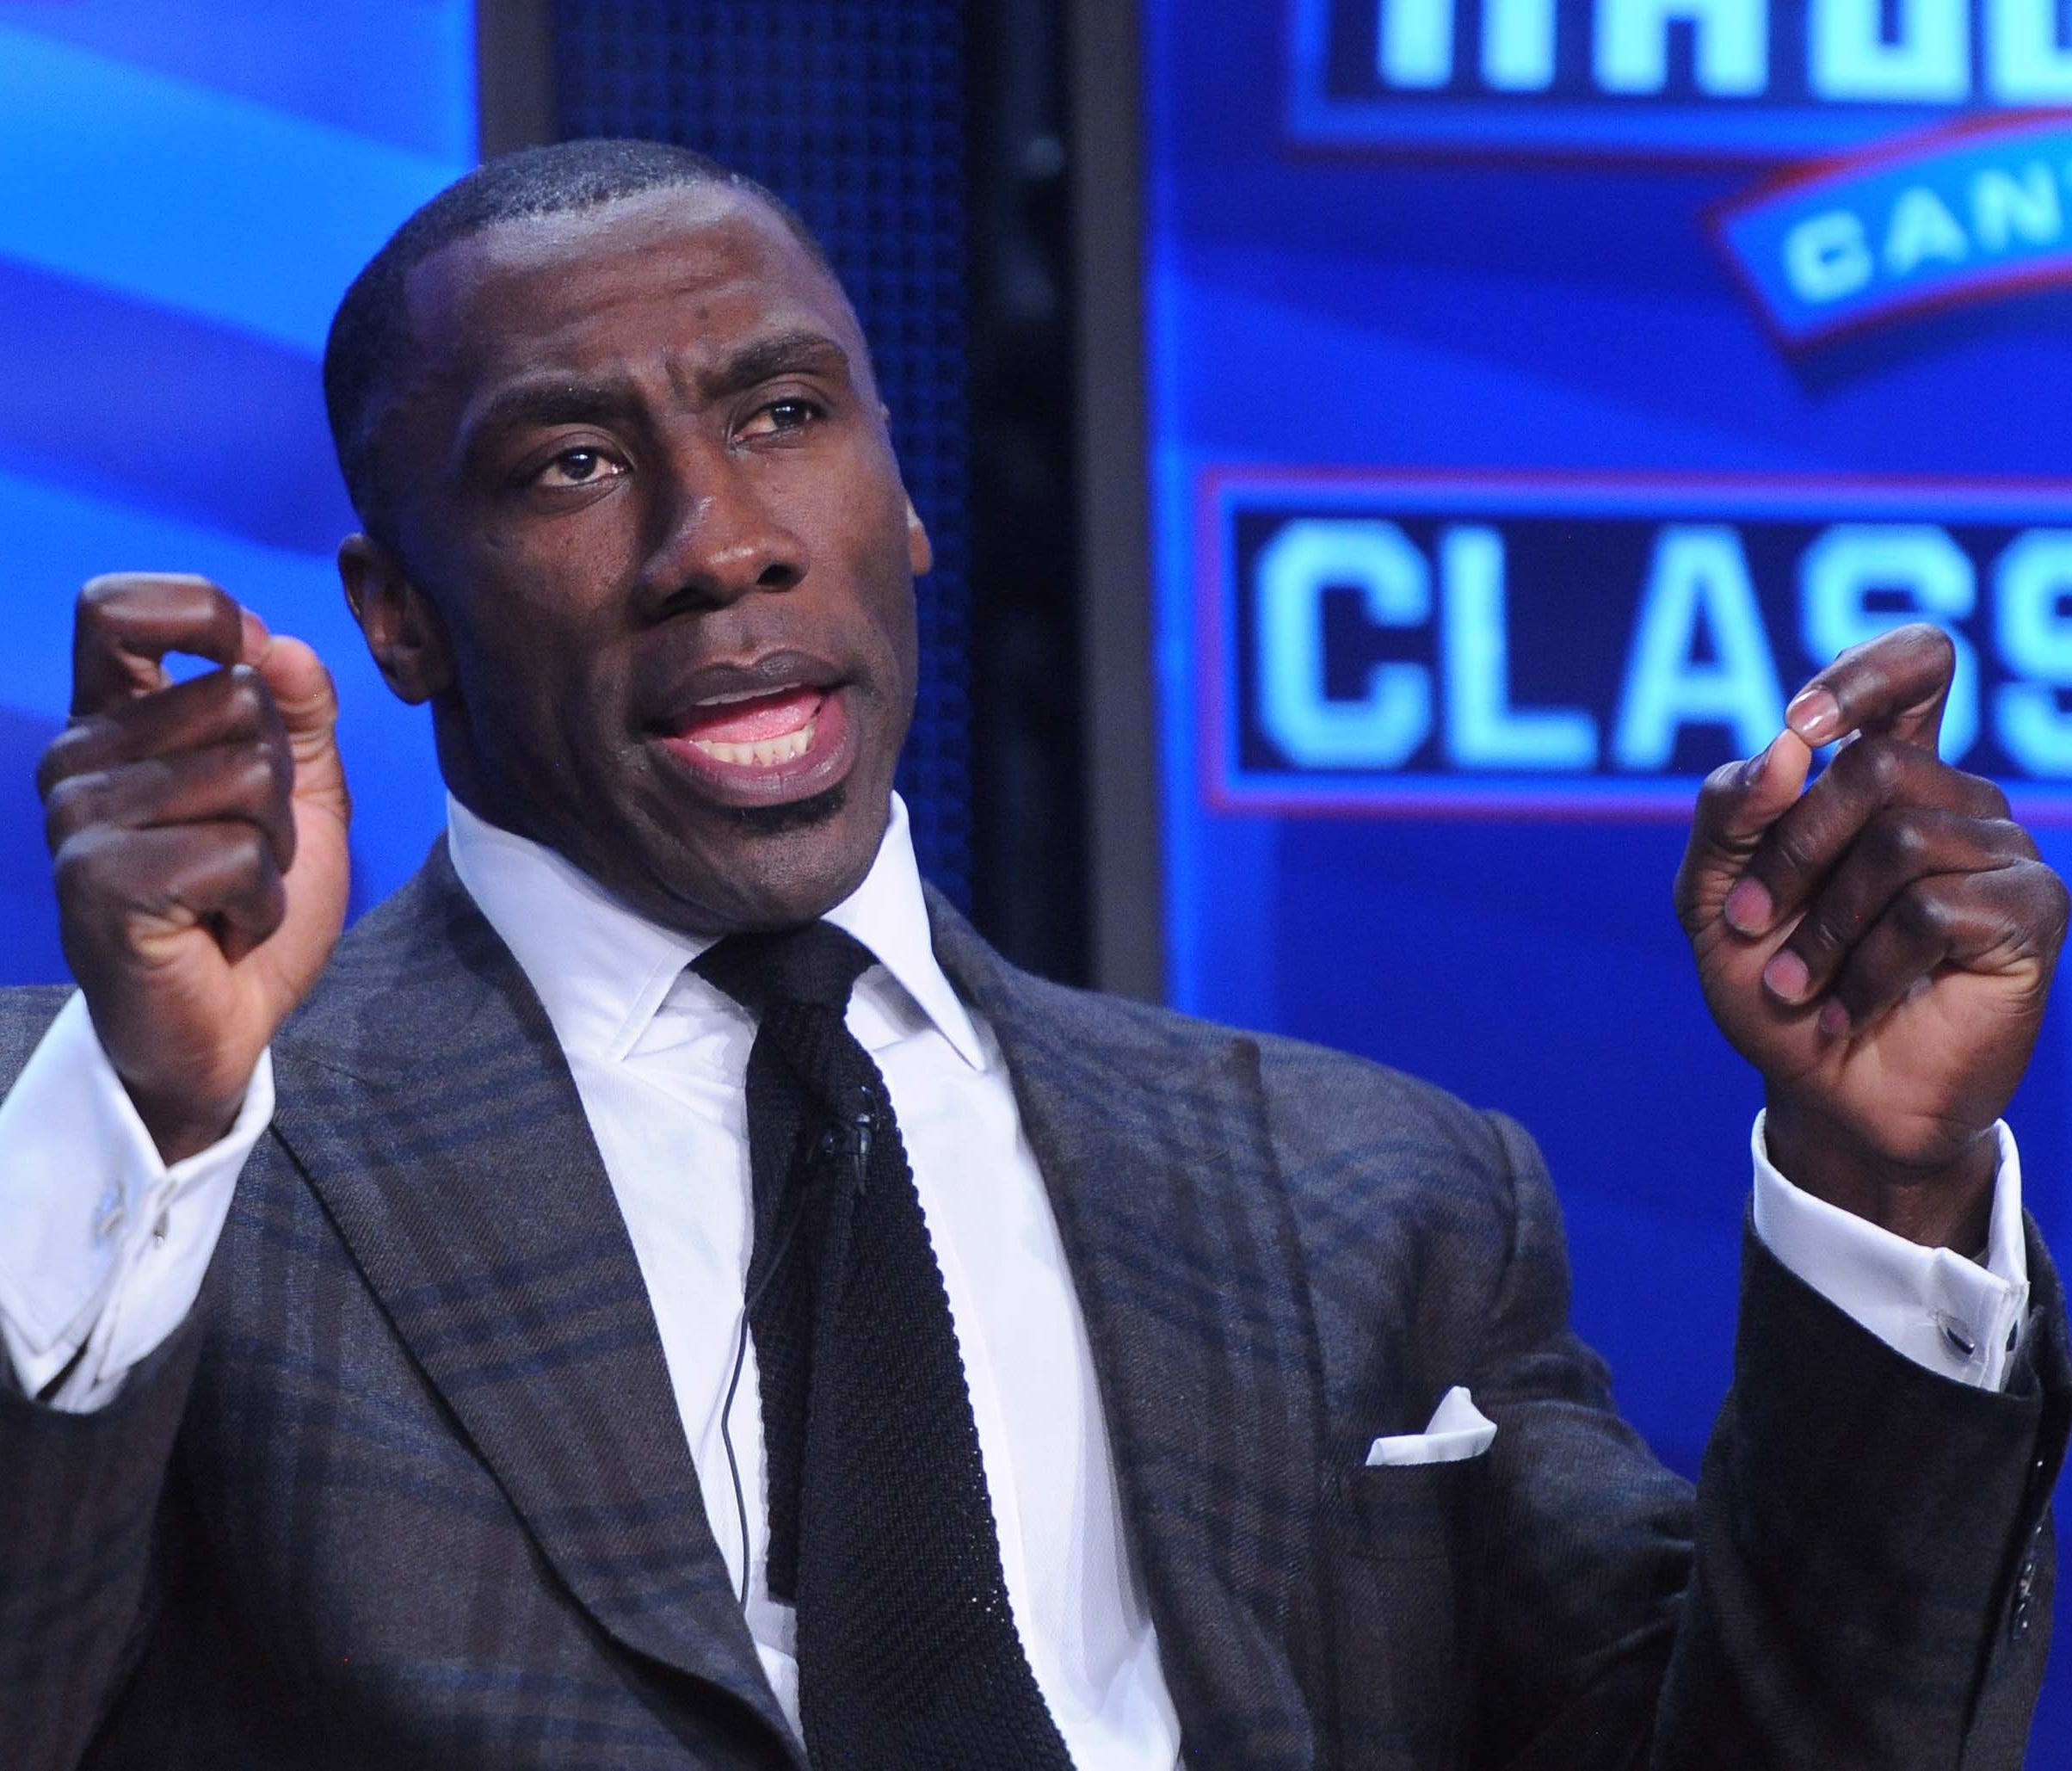 Feb 5, 2011; Dallas, TX, USA; Shannon Sharpe at the 2011 Pro Football Hall of Fame announcement show at the Super Bowl XLV media center at the International Conference and Exposition Center. Mandatory Credit: Kirby Lee/Image of Sport-US PRESSWIRE ORI